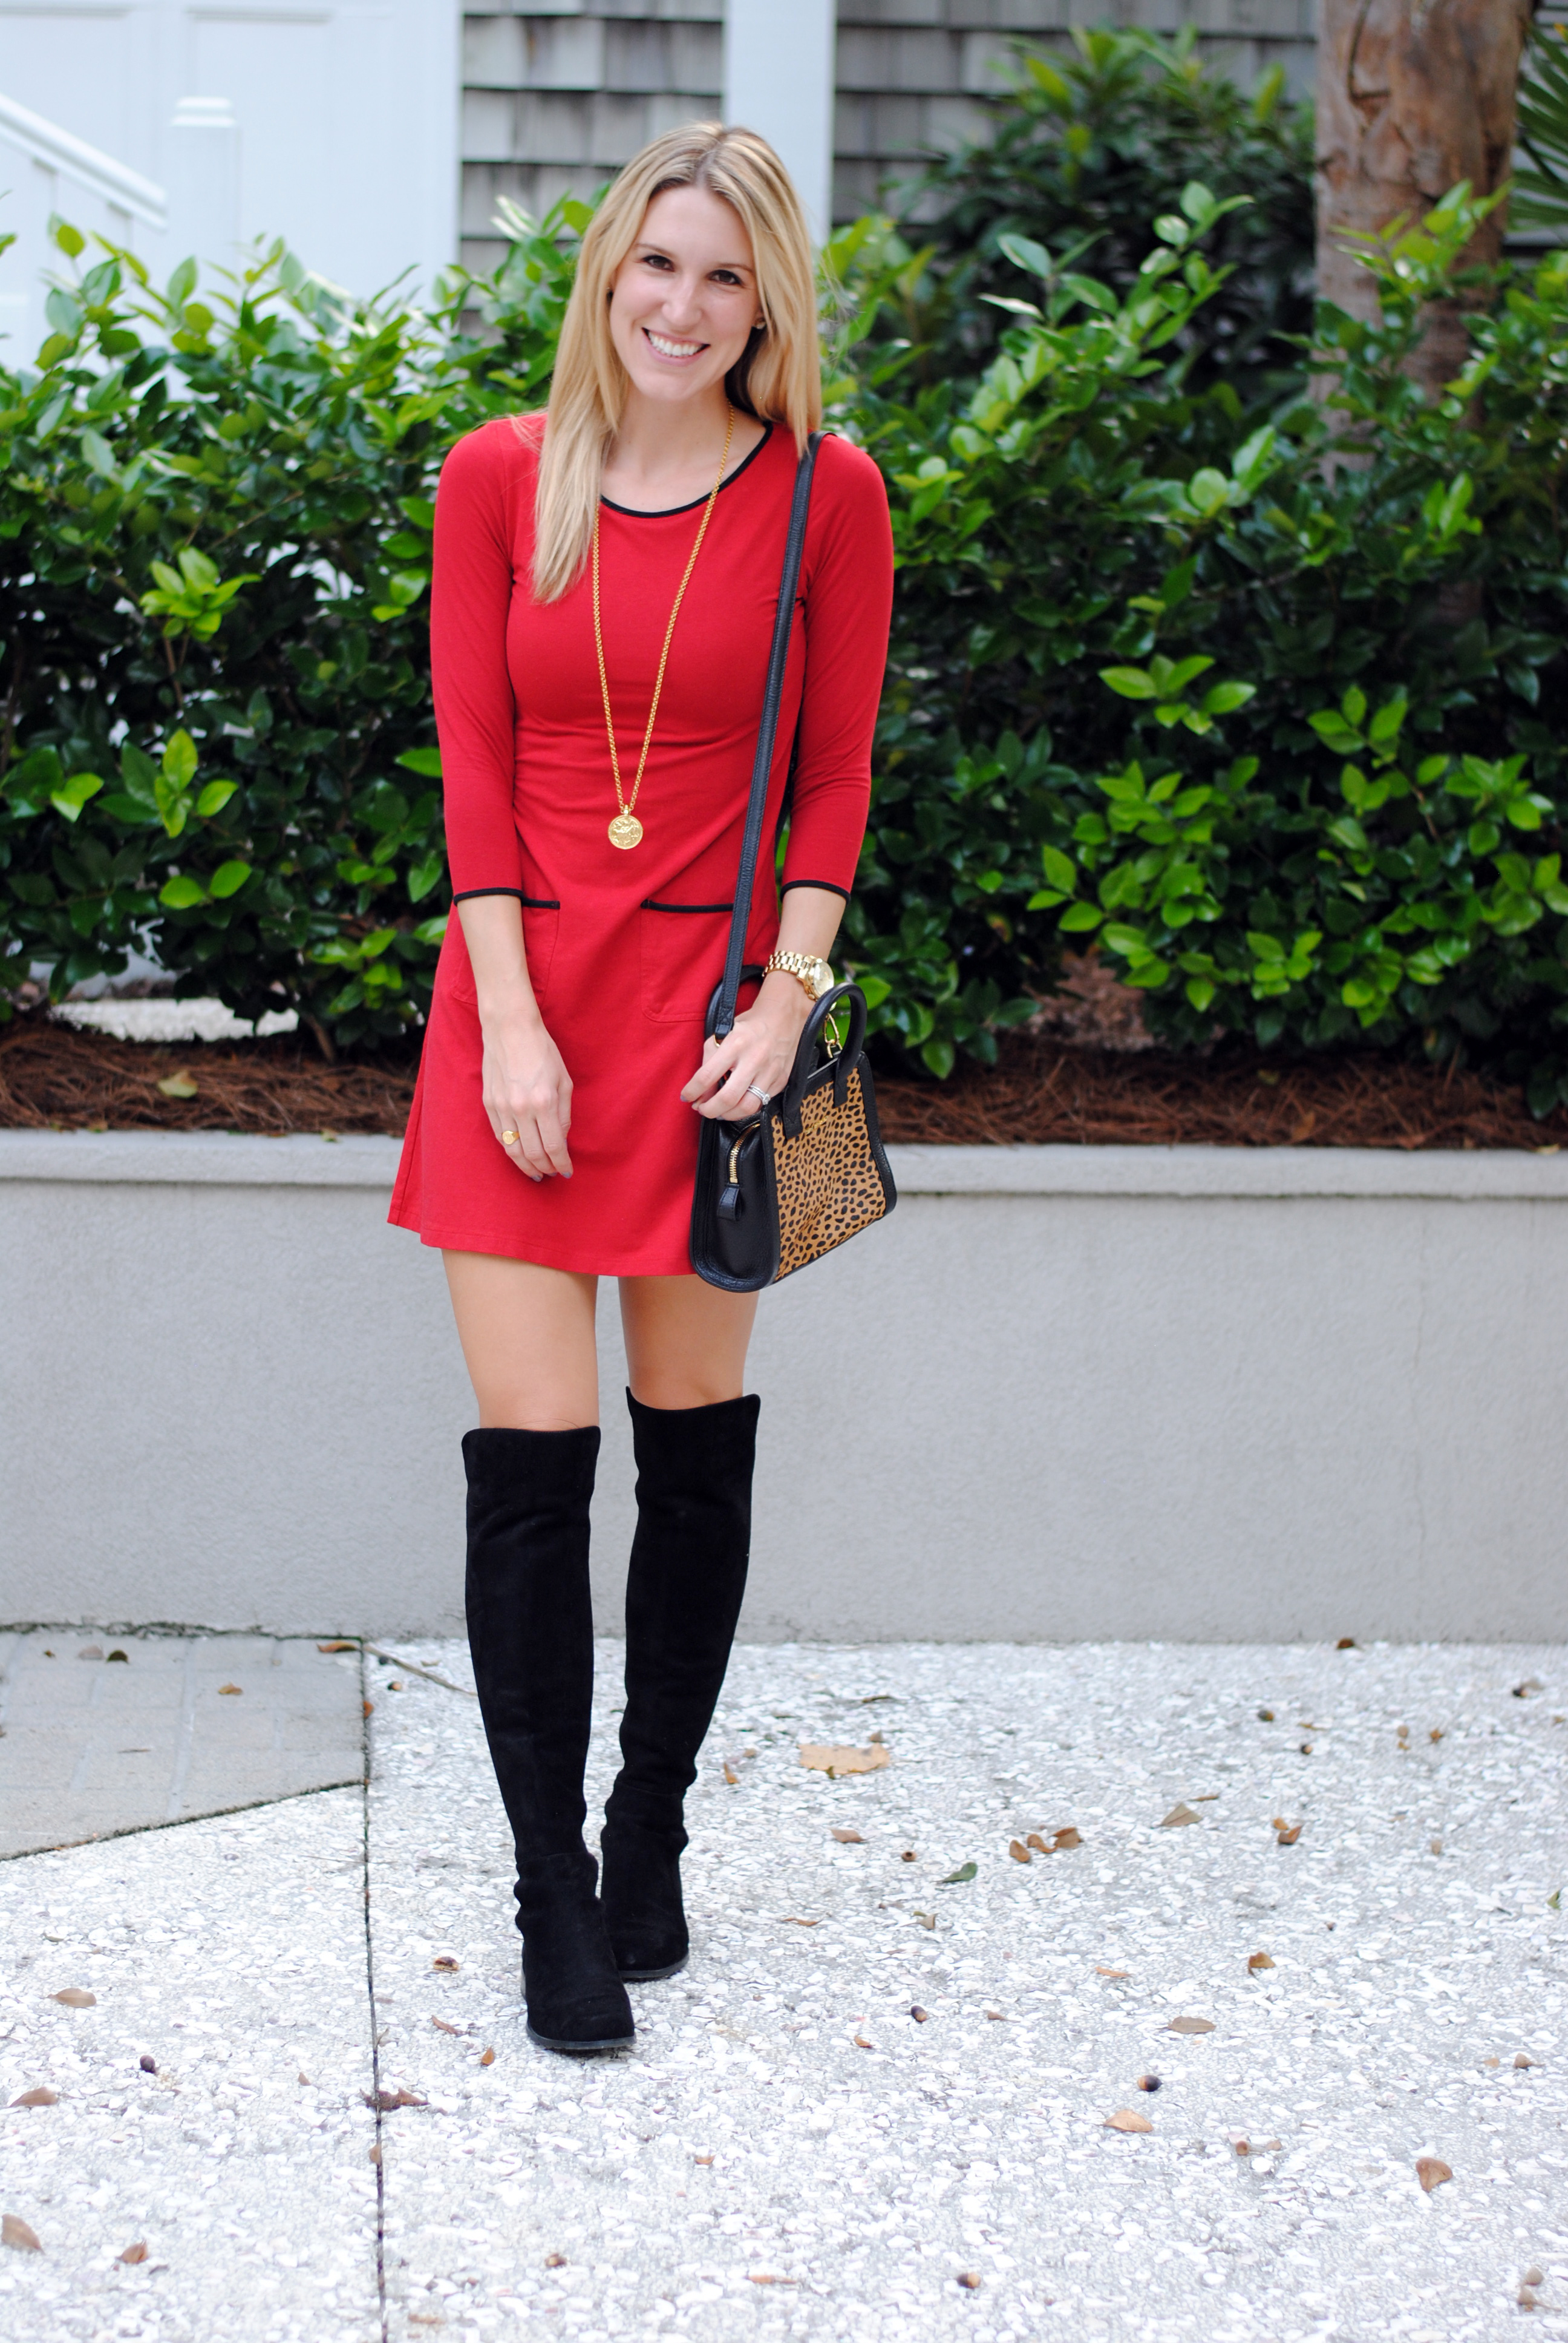 red dress and boots